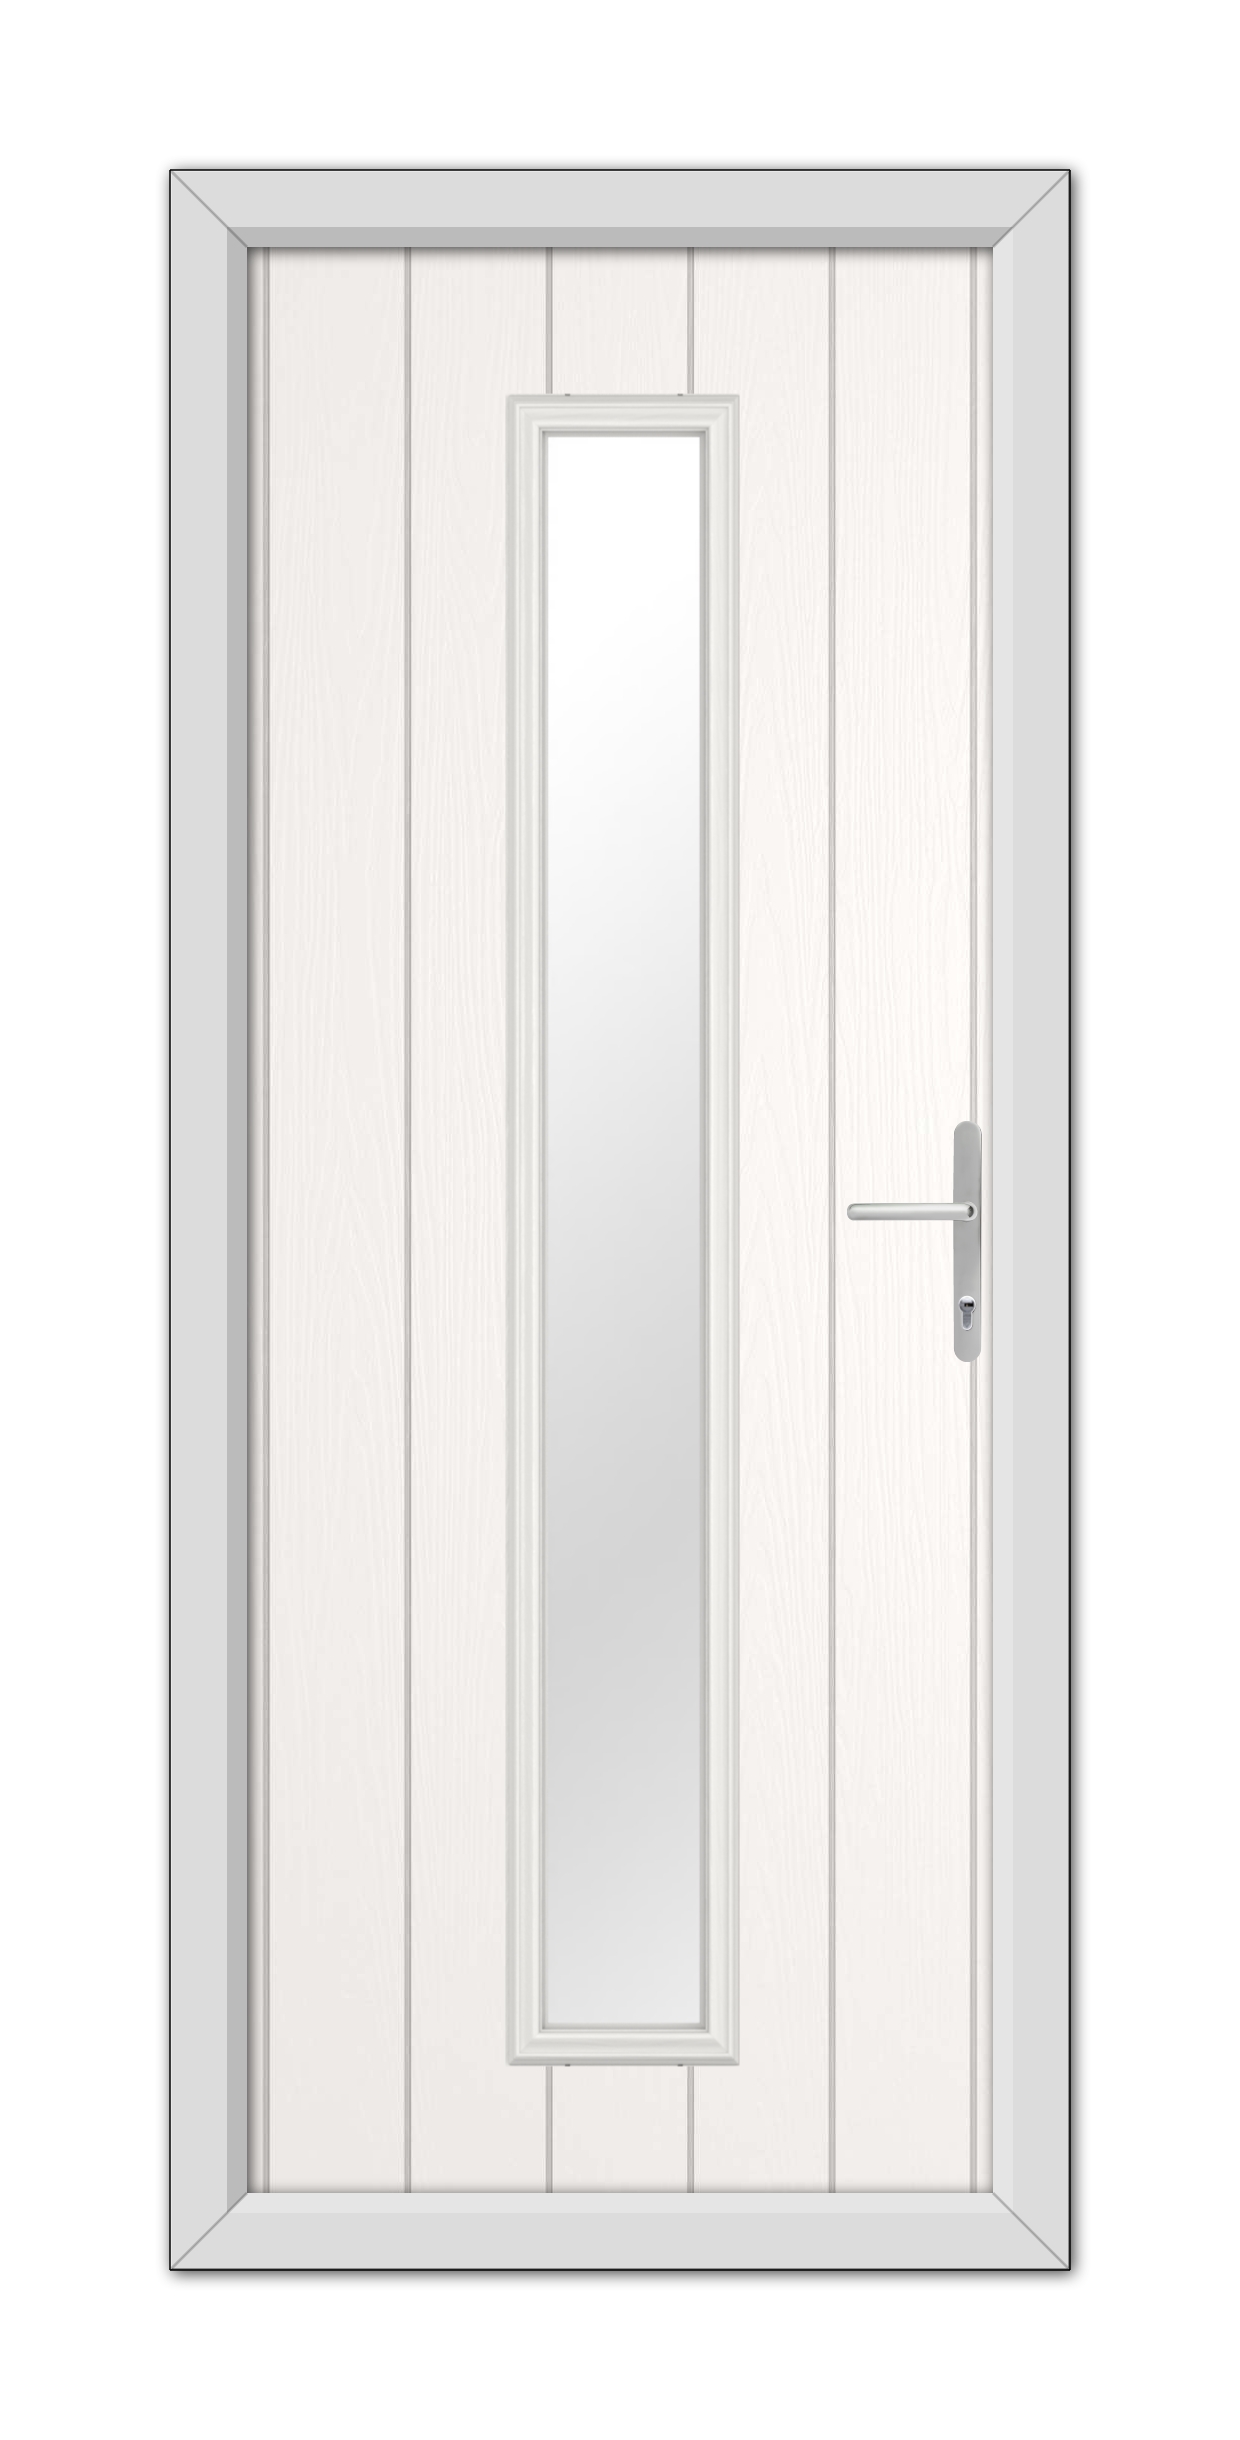 White Rutland Composite Door 48mm Timber Core with a vertical, narrow glass panel and a modern handle, set within a simple frame.